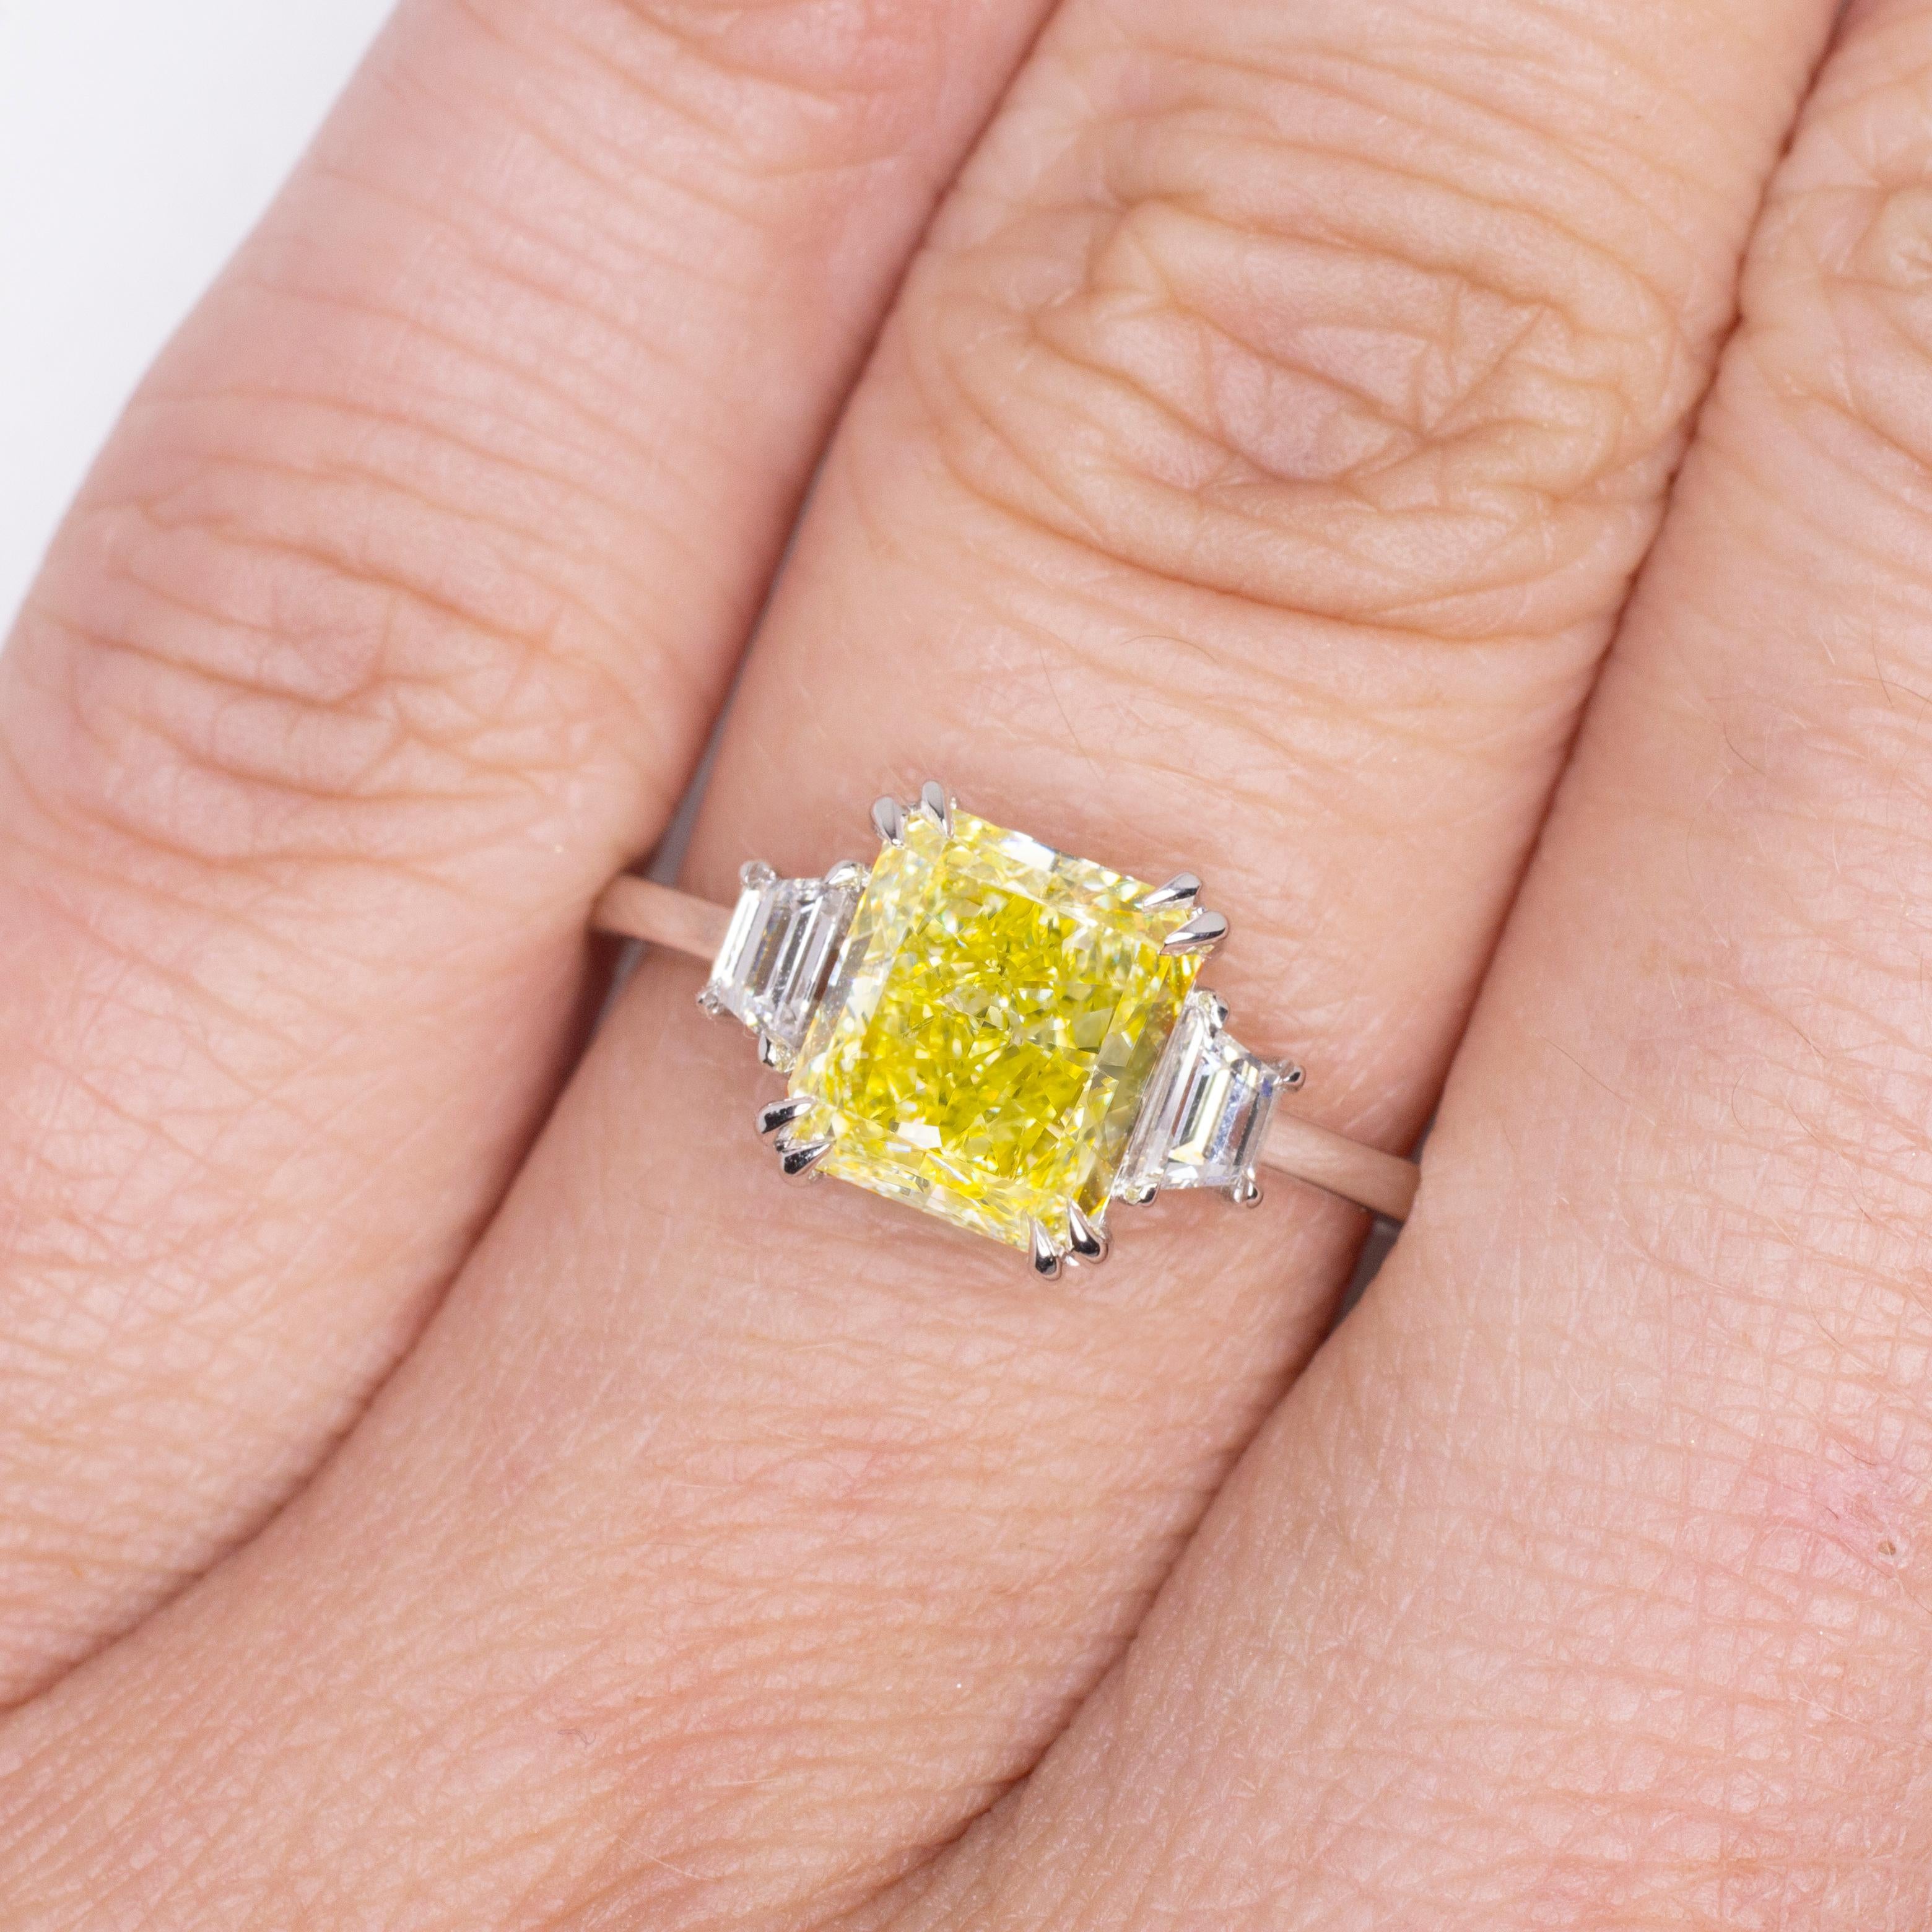 Contemporary GIA Certified 1.38 Carat Fancy Yellow Radiant Cut Diamond 18K White Gold Ring For Sale